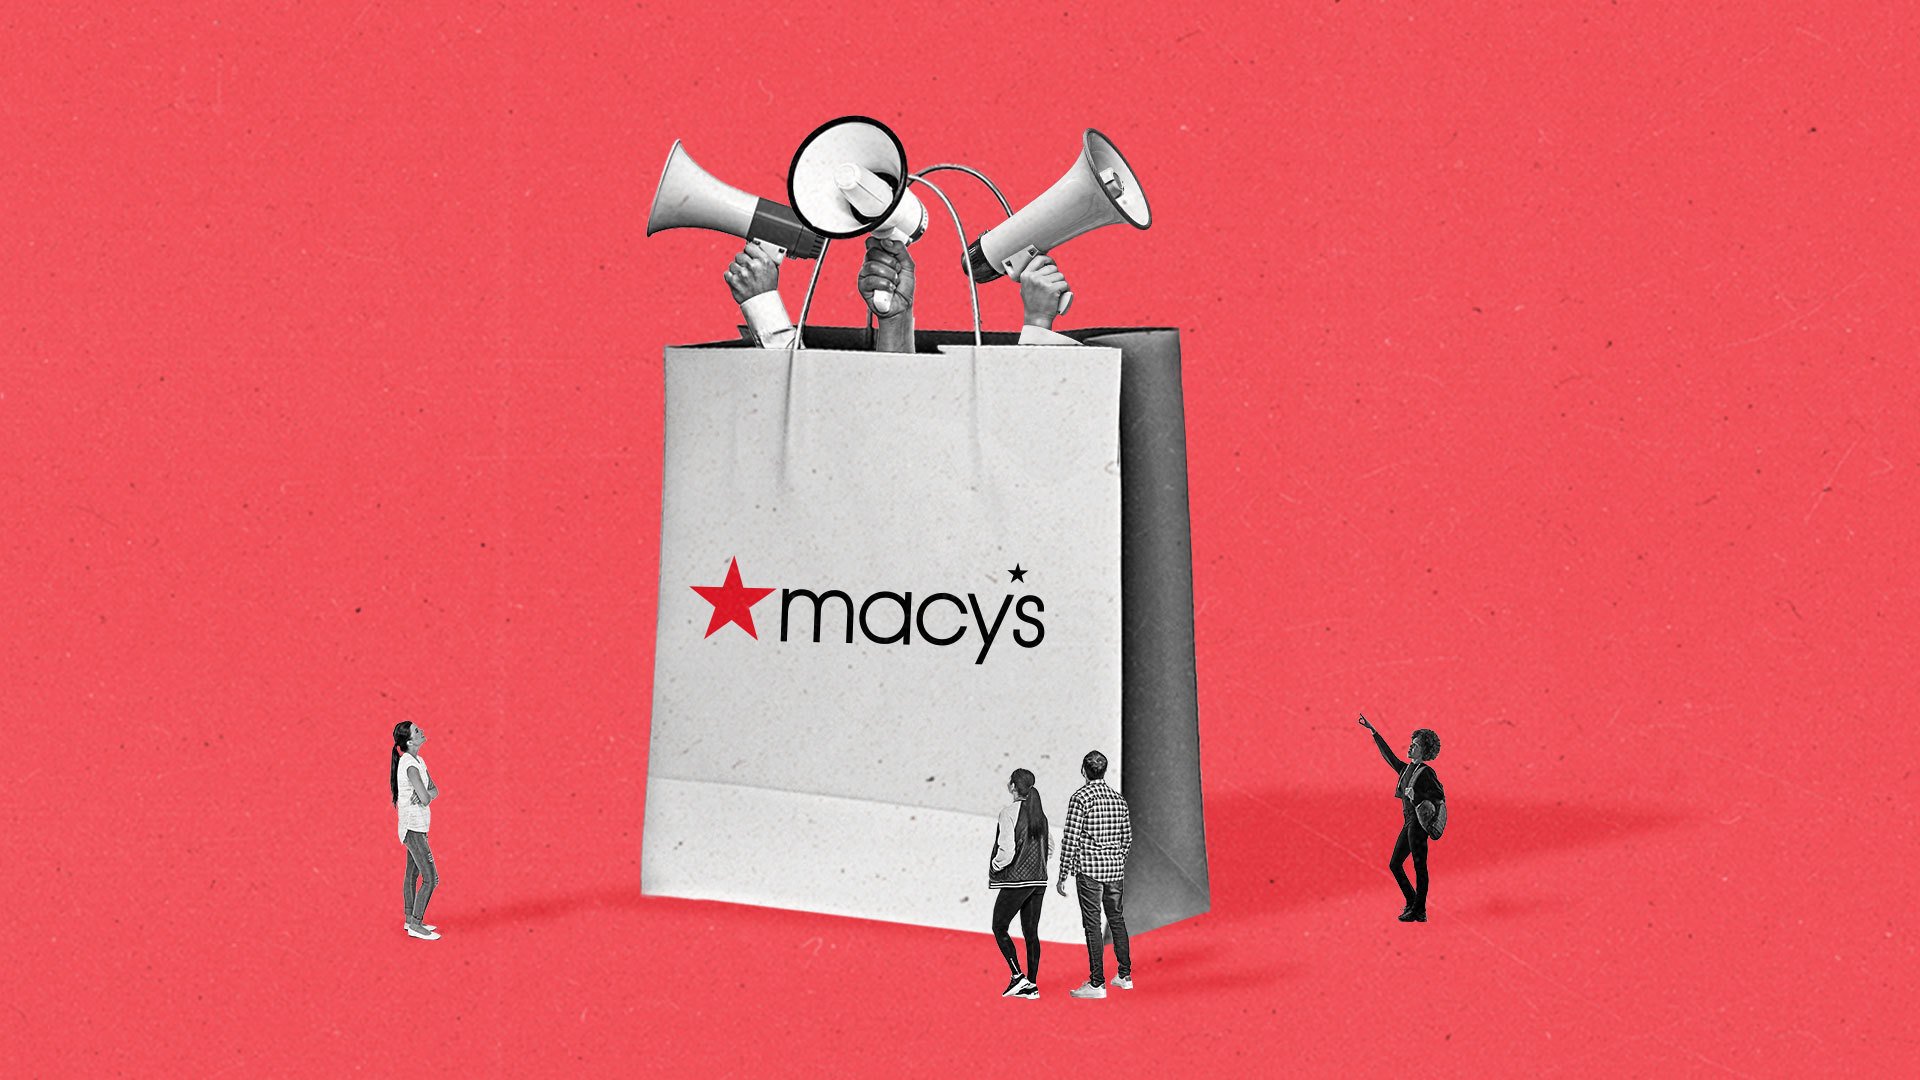 Macy's expanded retail media strategy is calling all brands